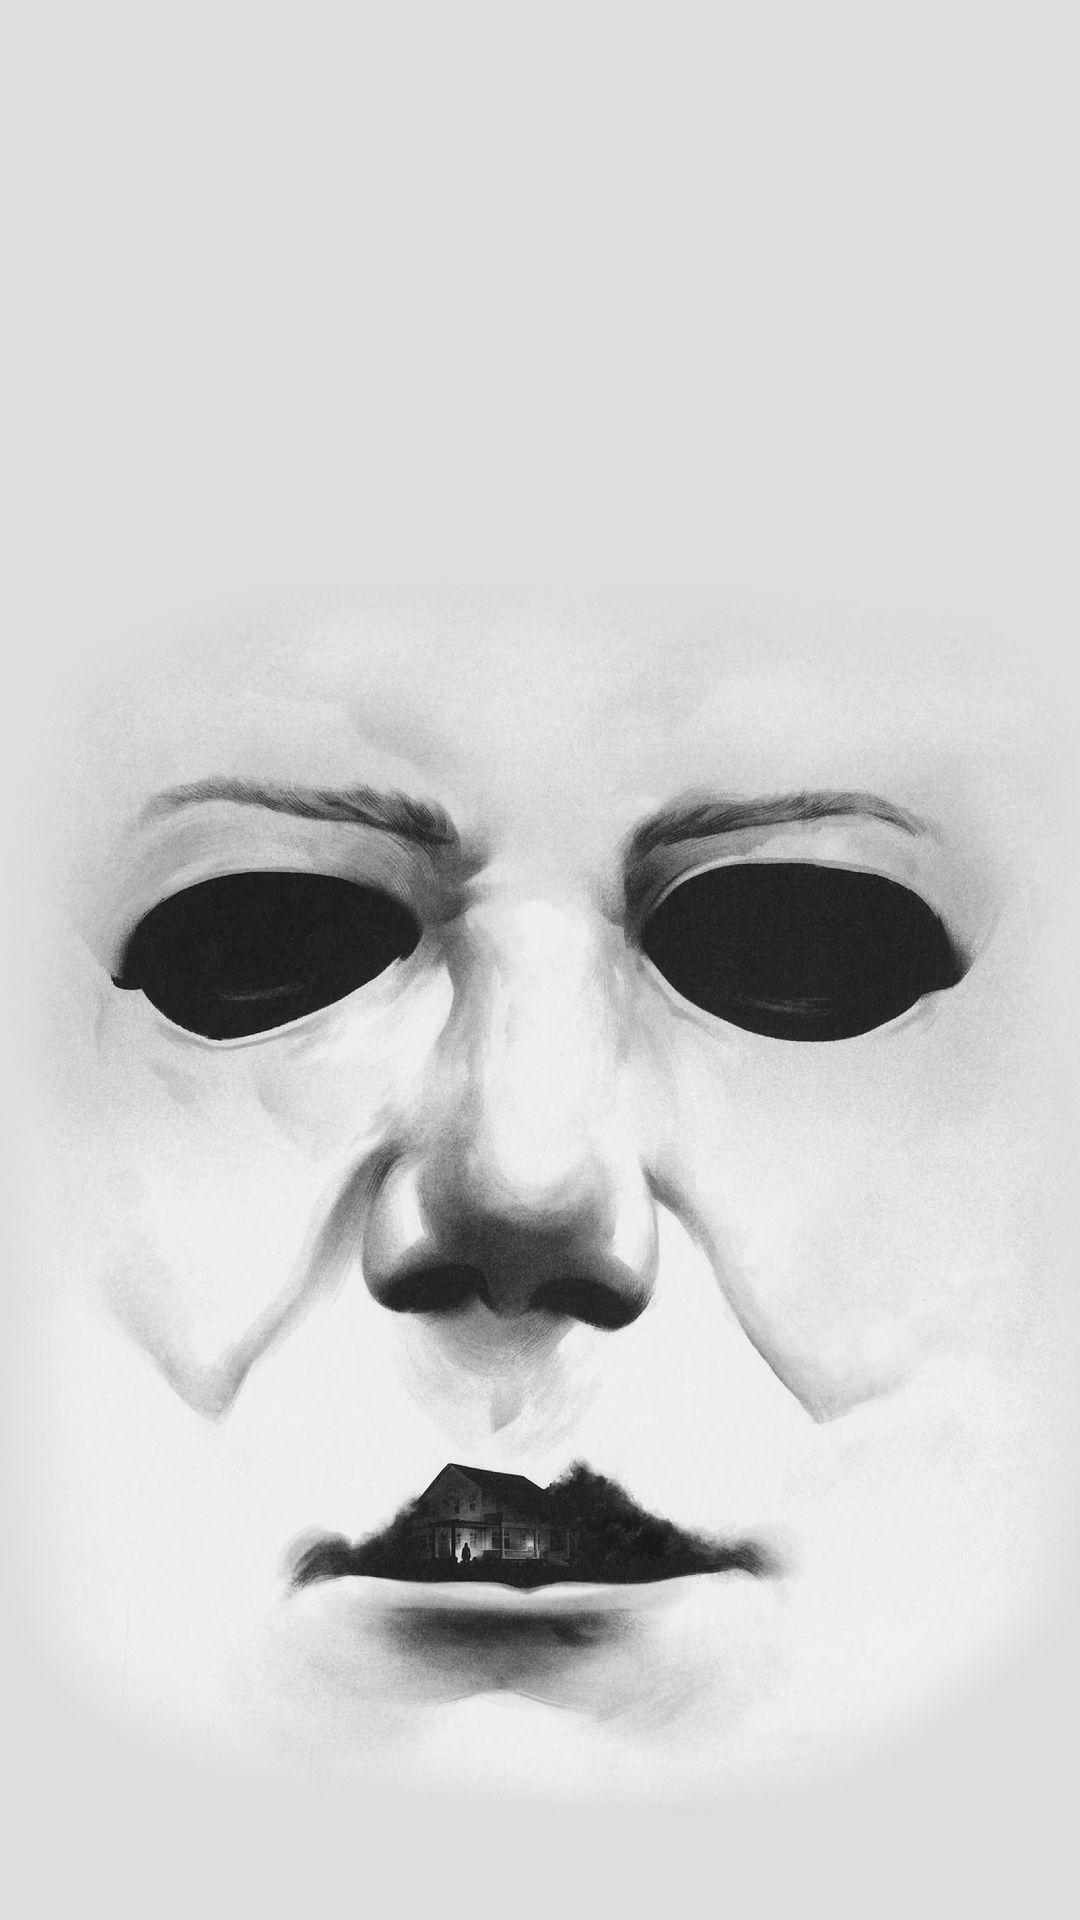 Michael Myers Mask Wallpapers